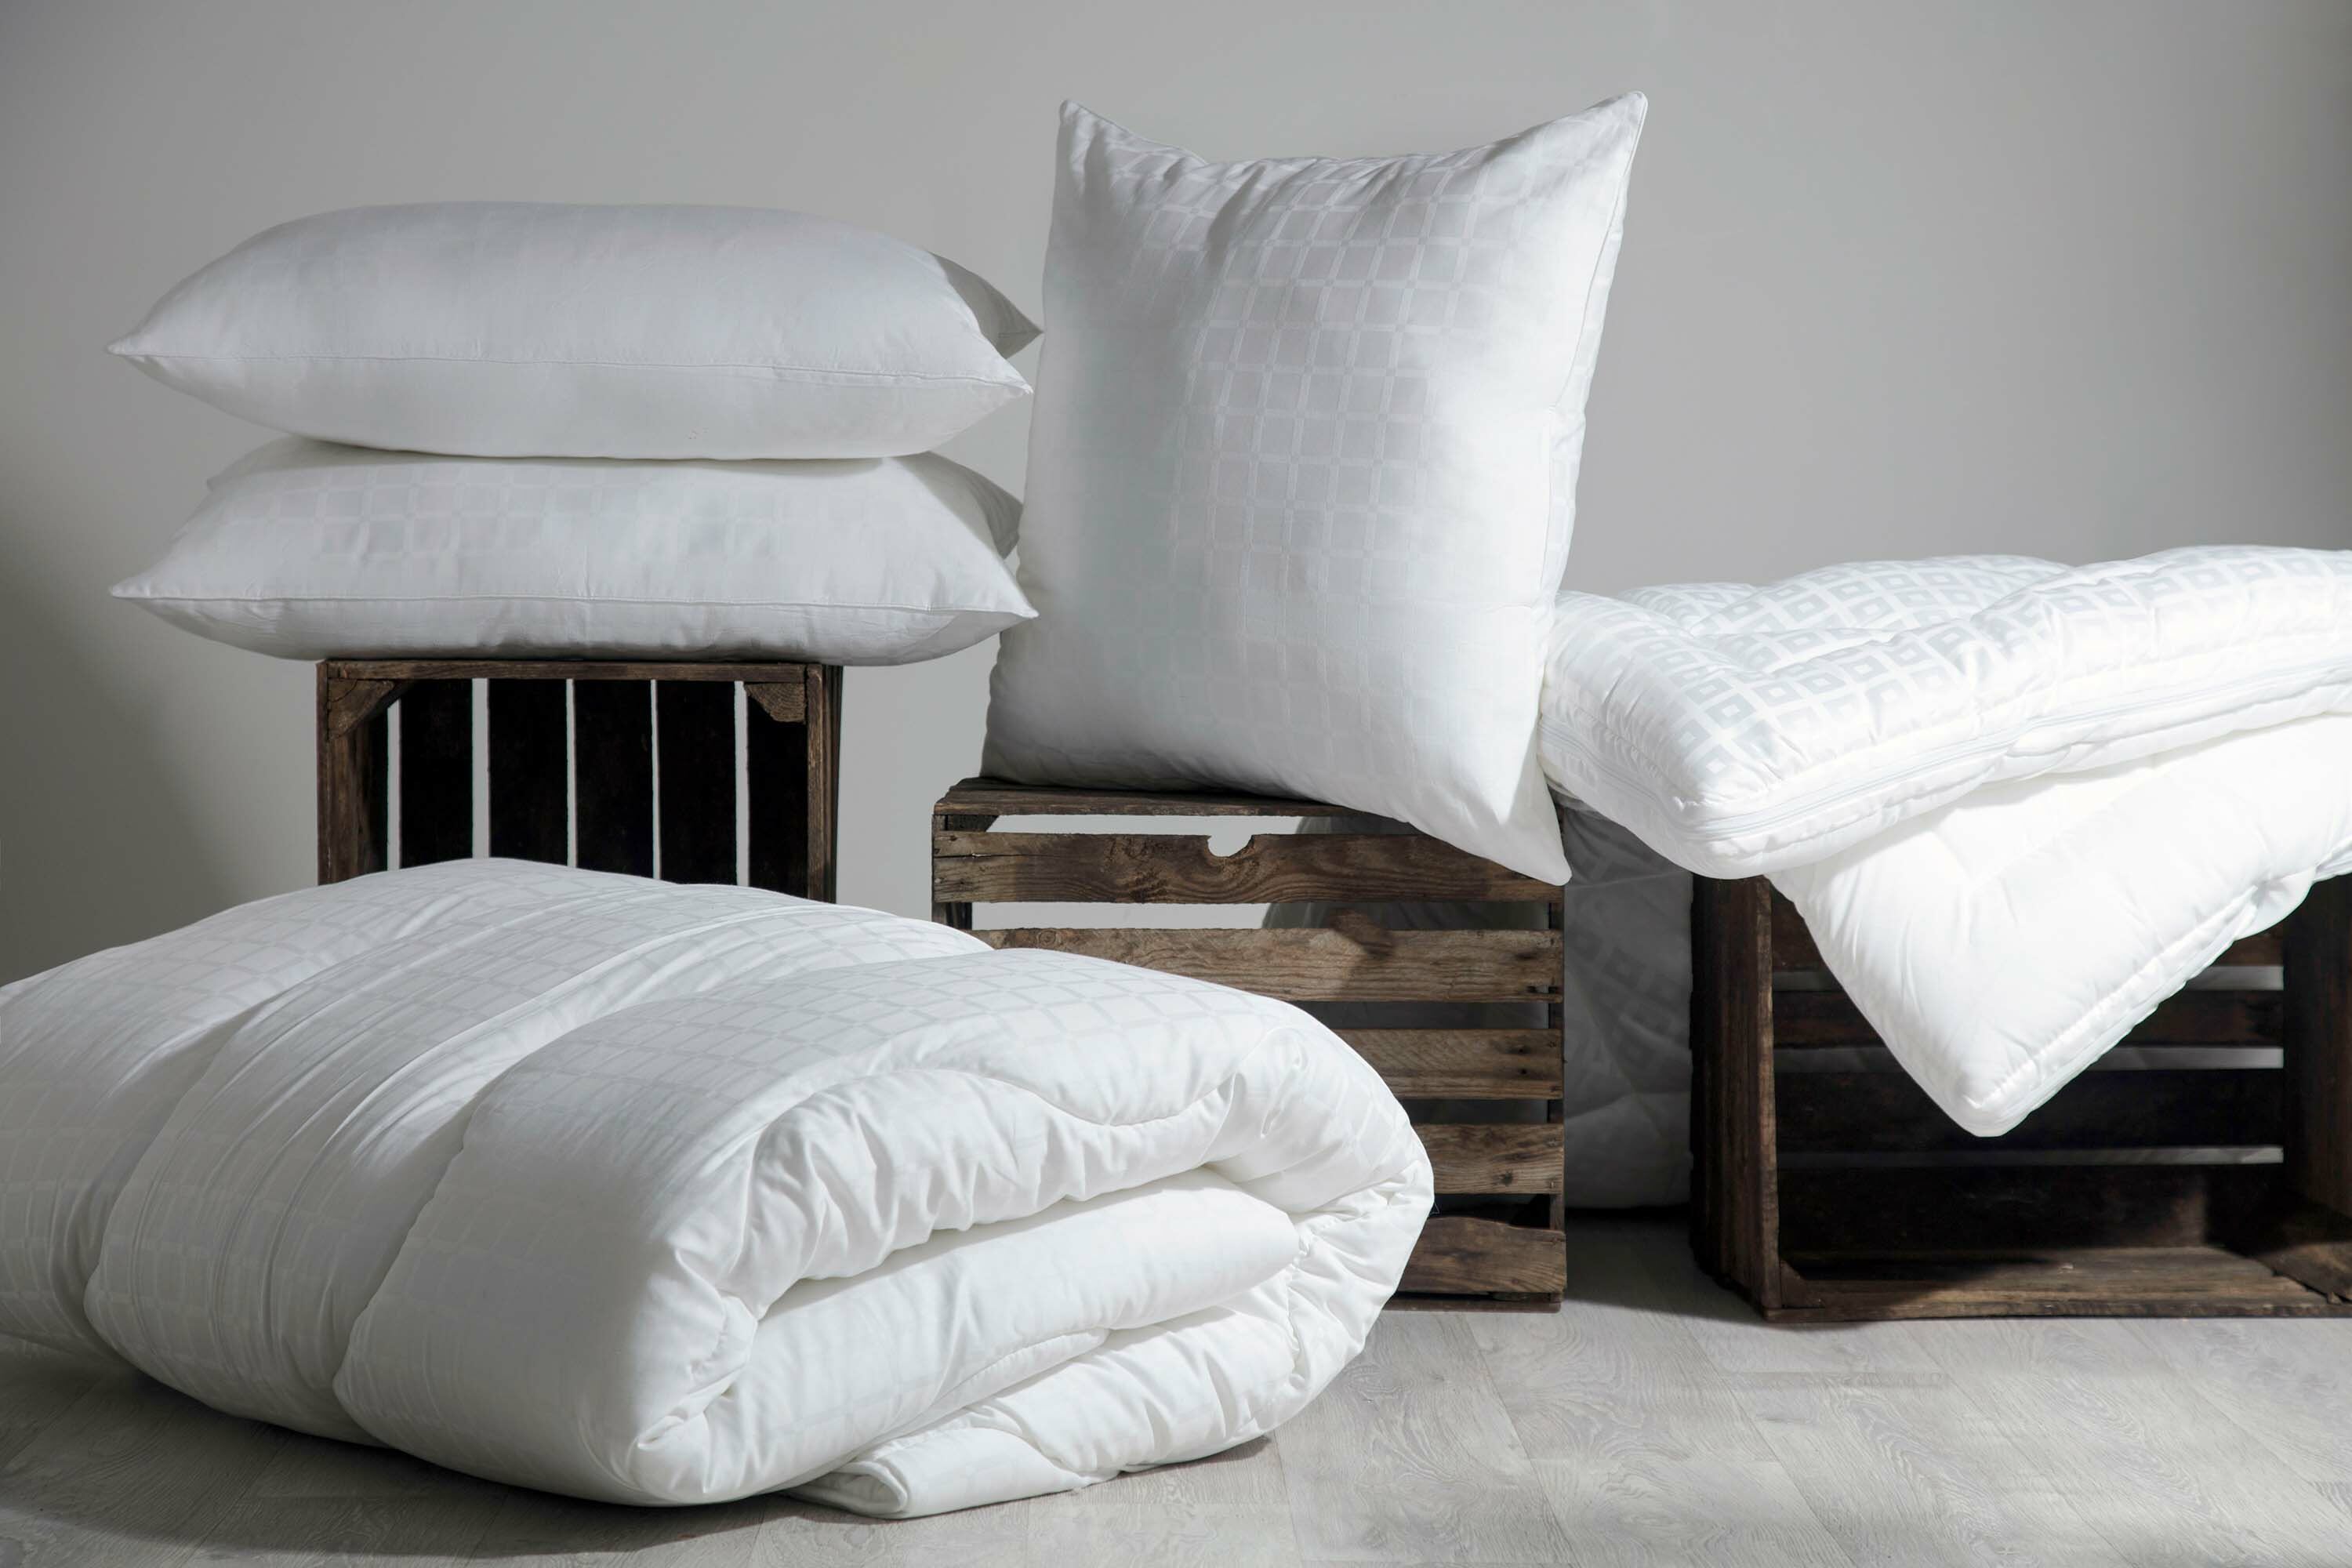 Cosy winter duvets and pillows